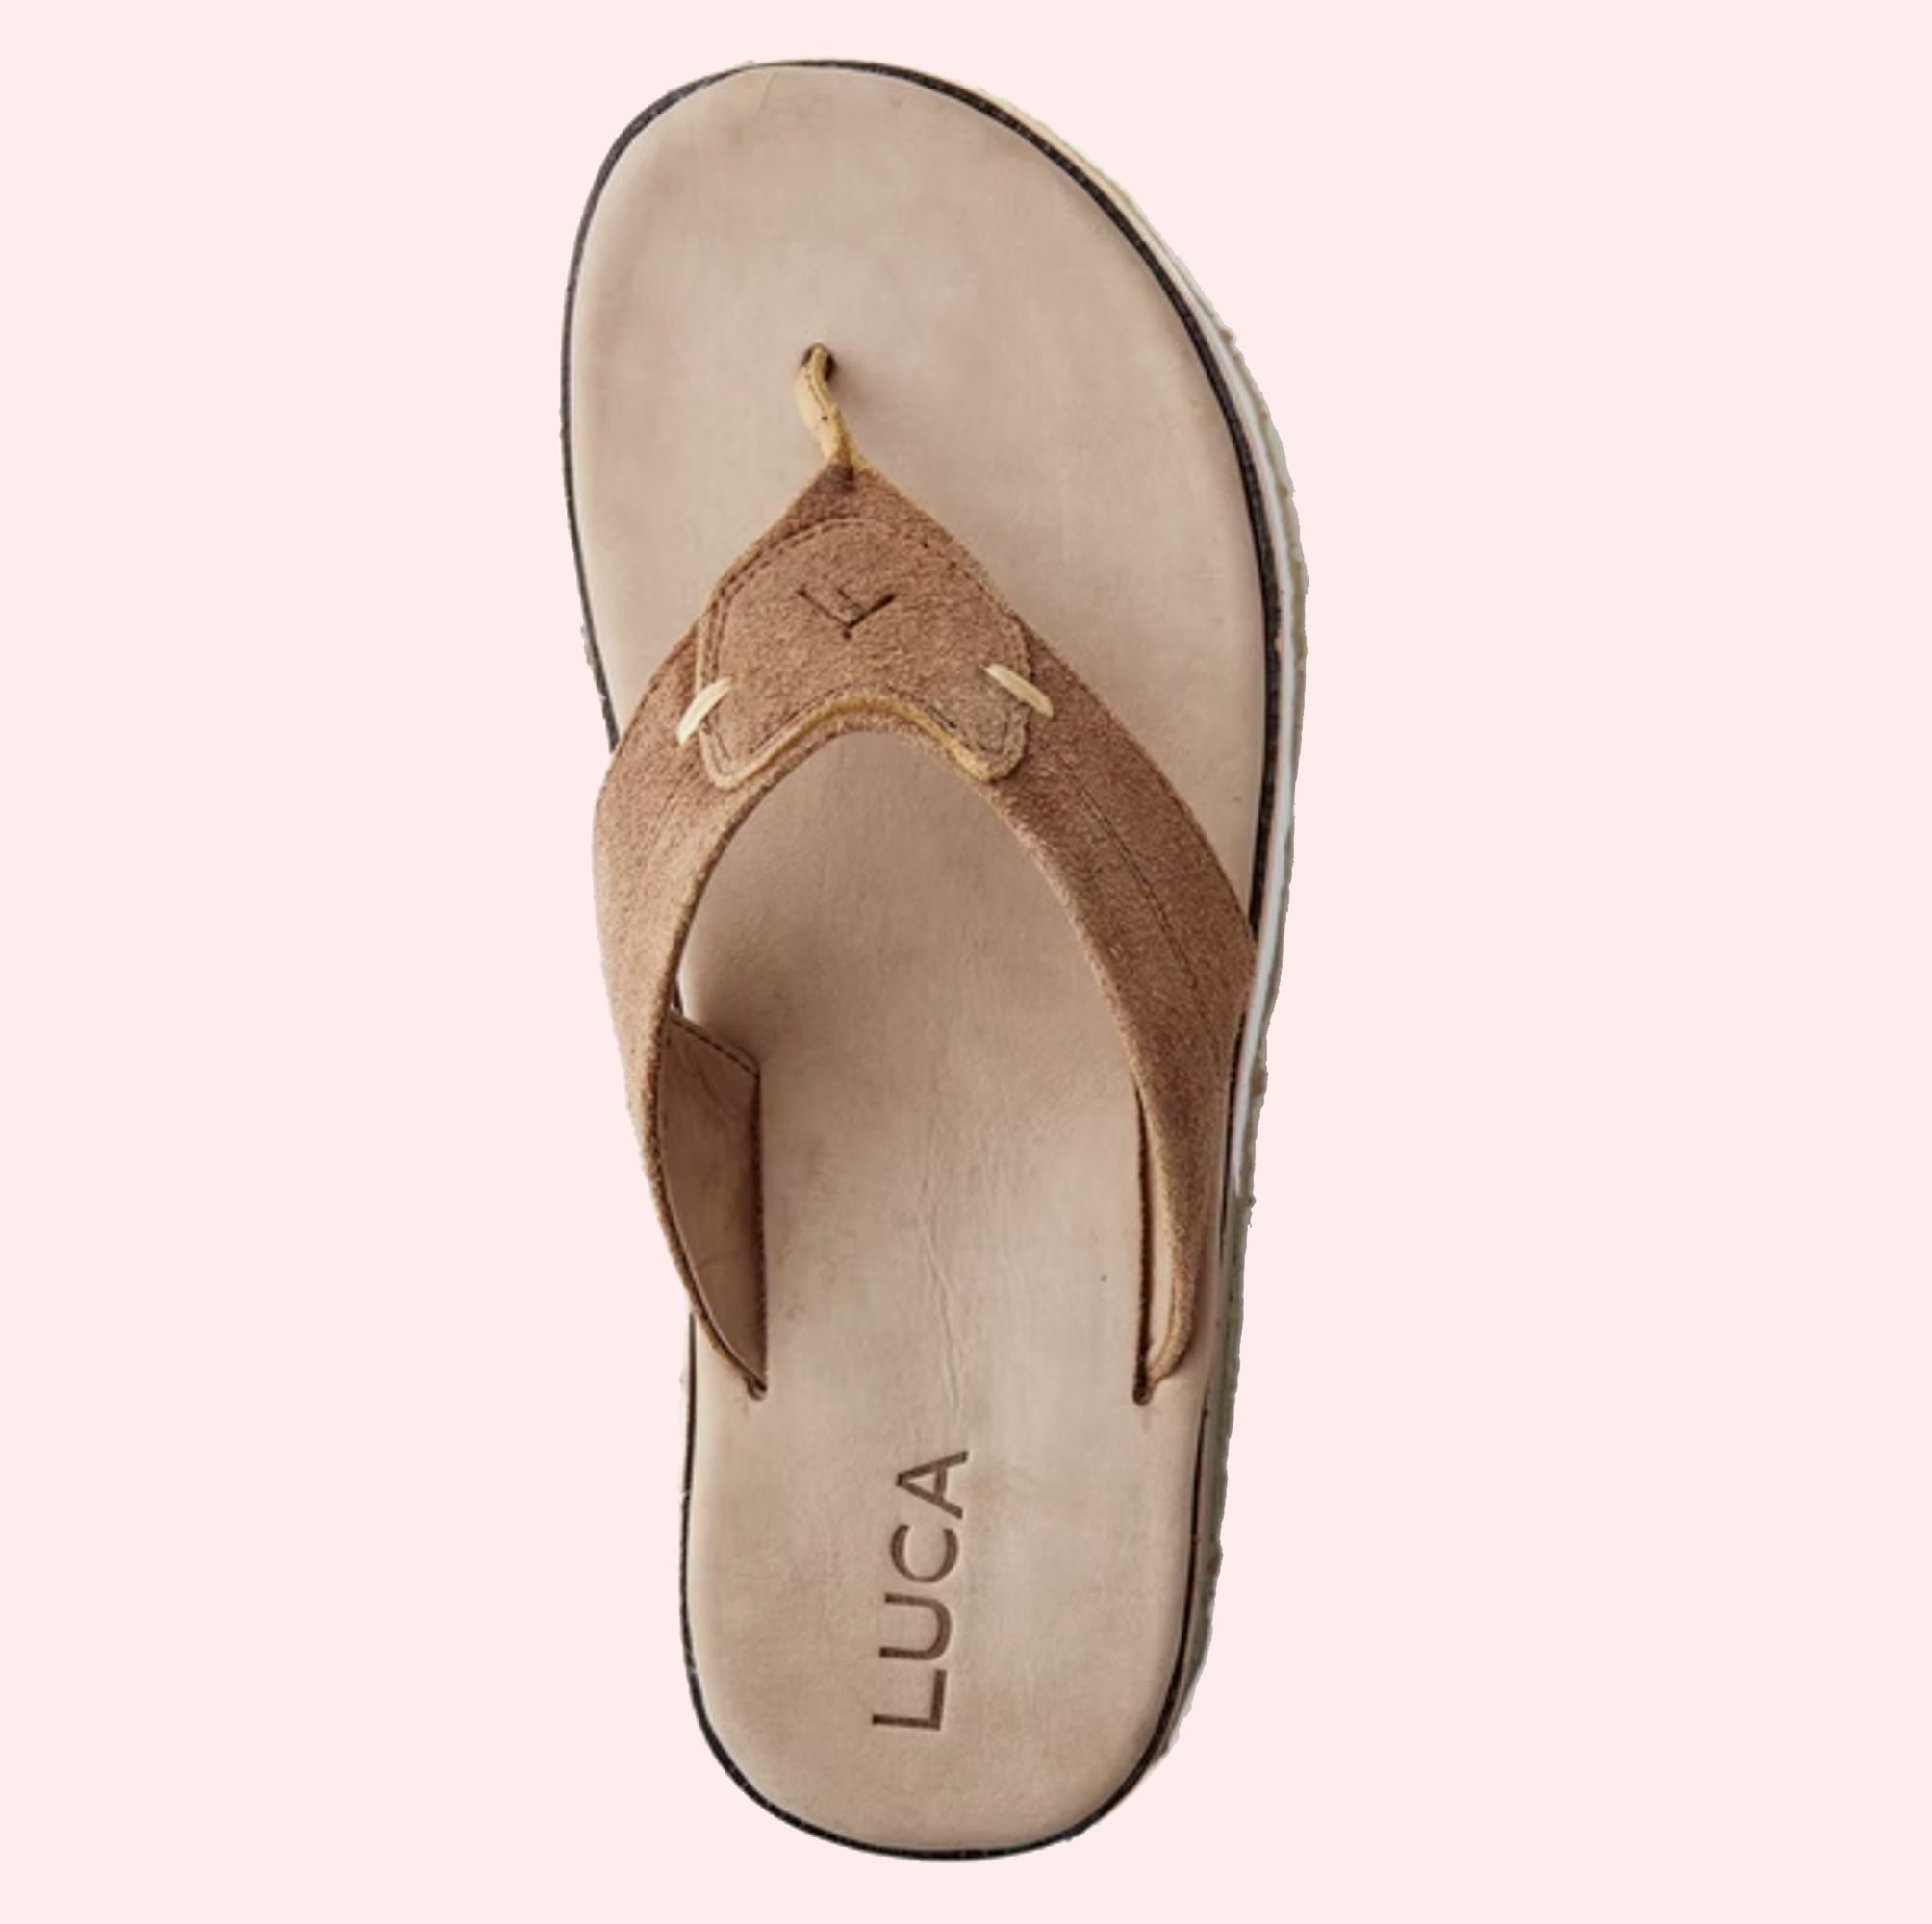 The 18 Flip-Flops You'll Want to Buy This Summer